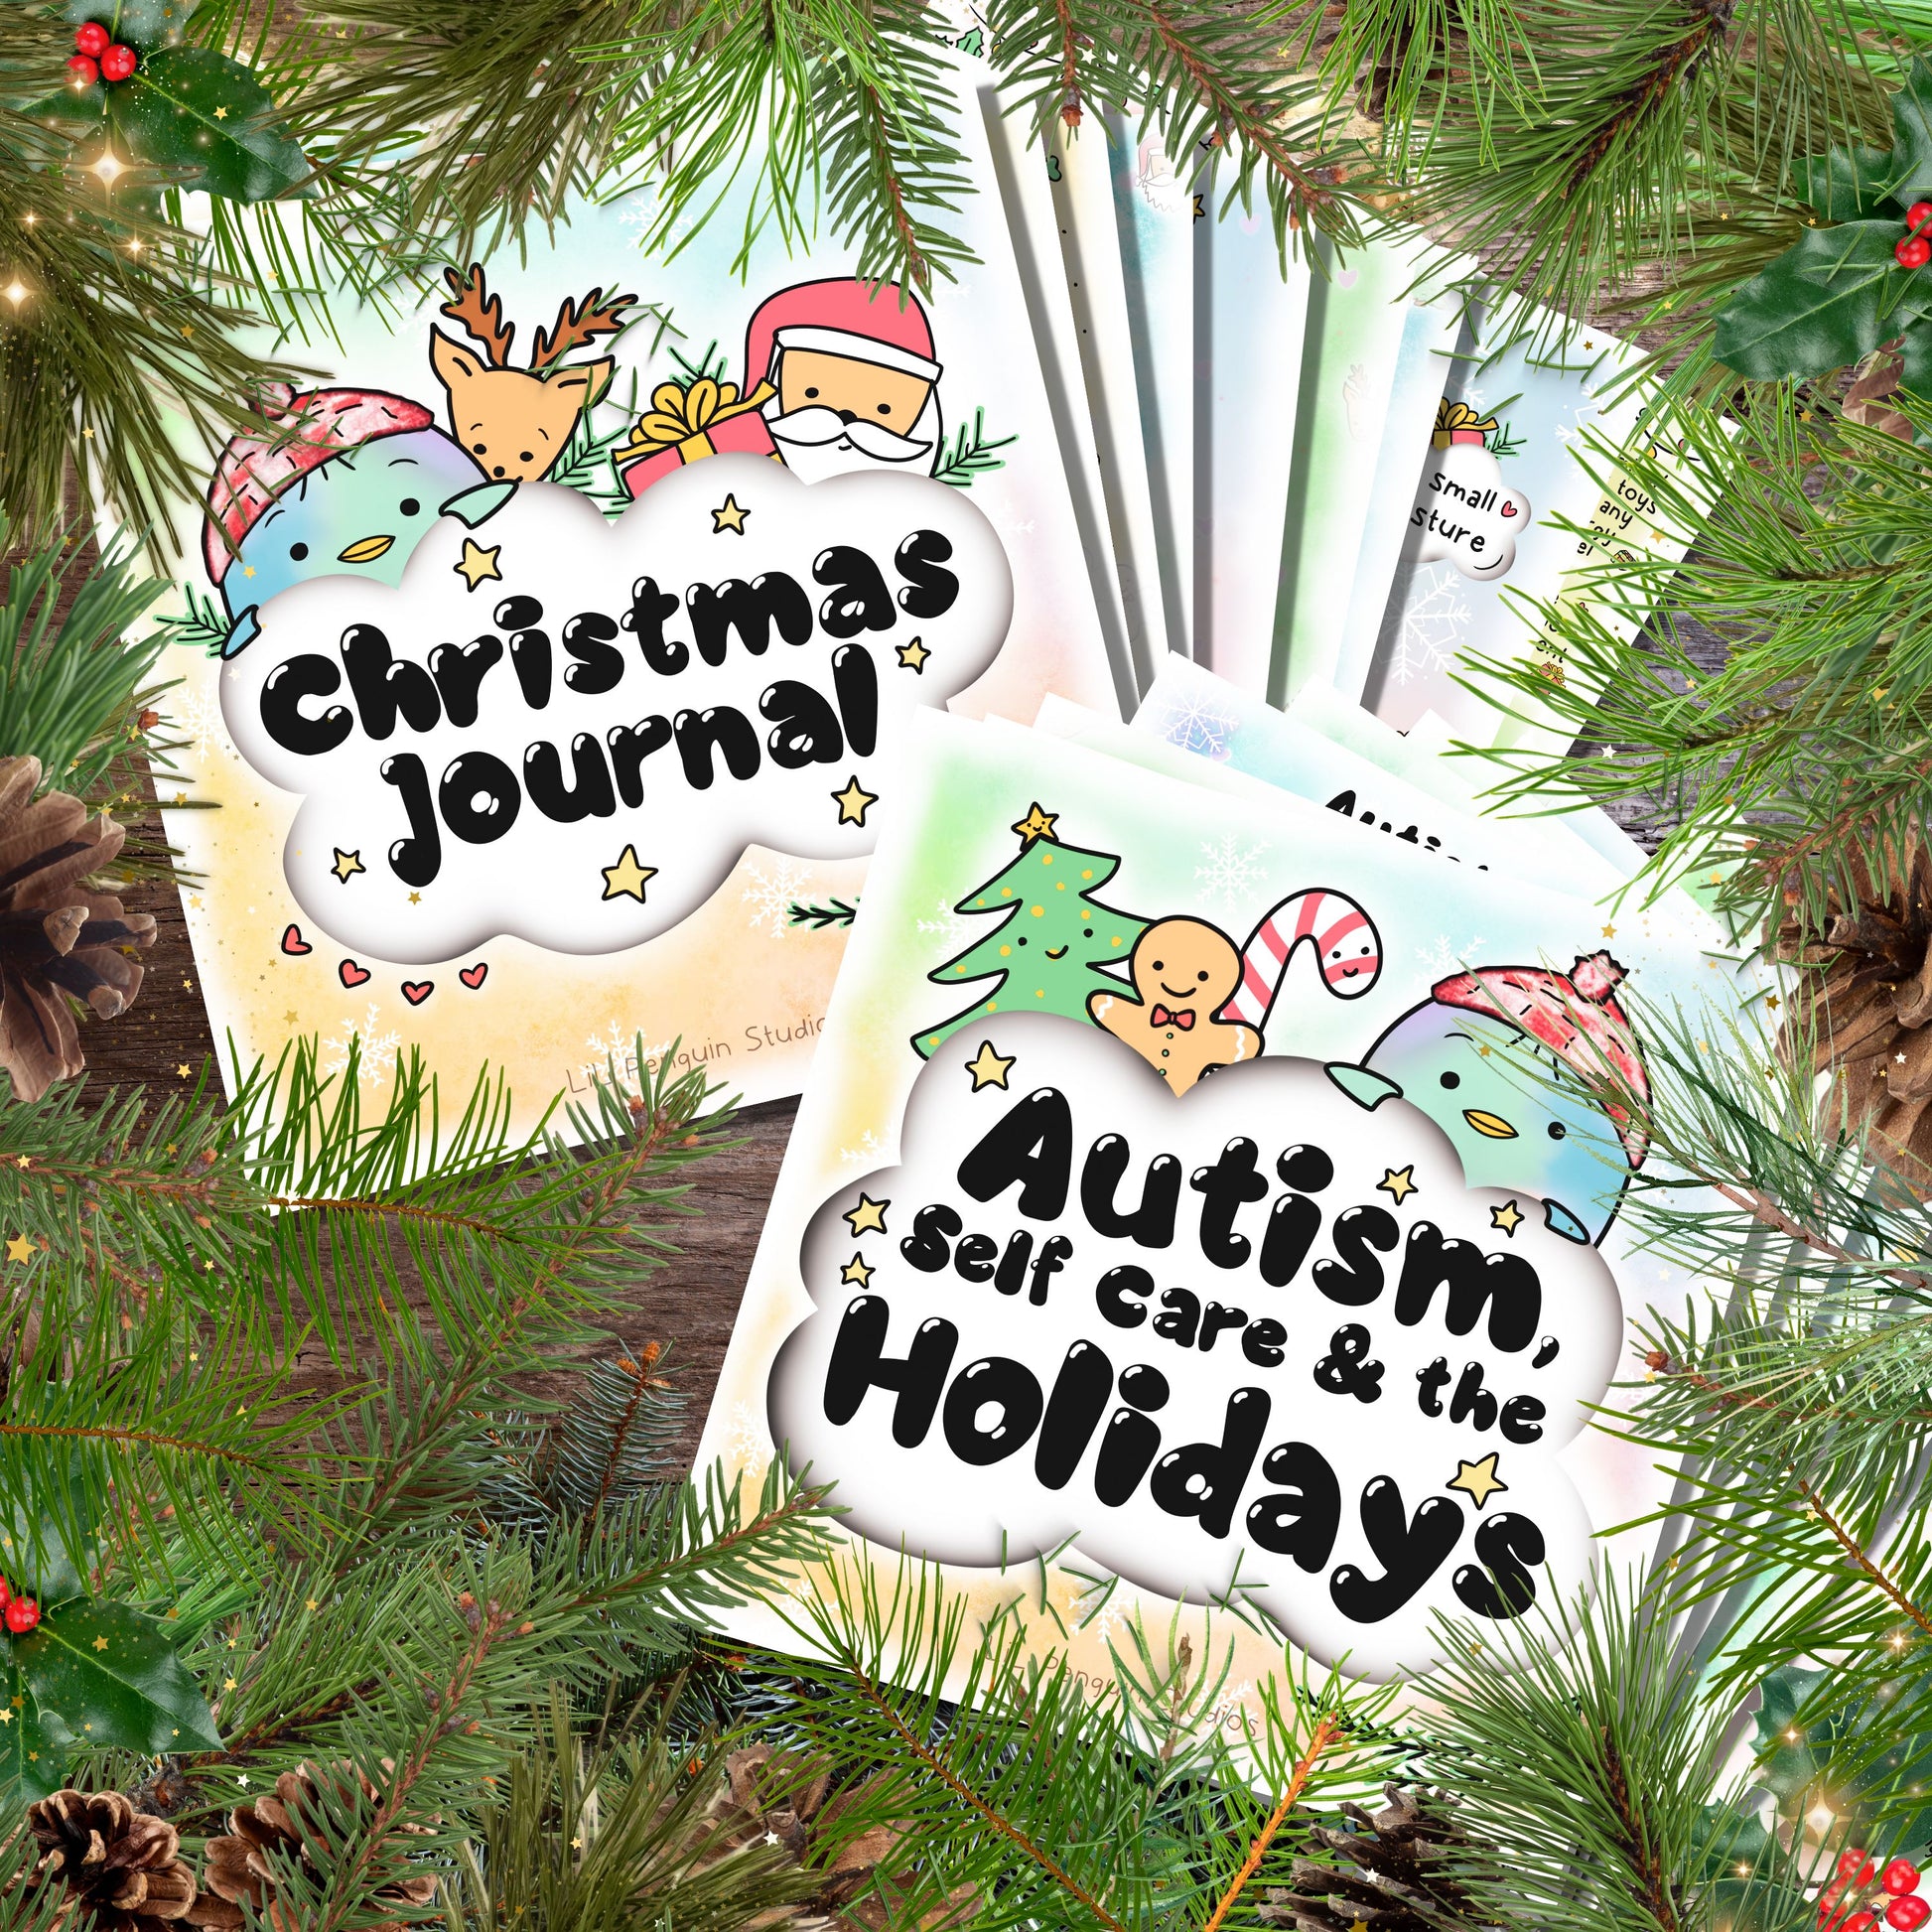 Autism Christmas Gift Set. A gentle guide to help autistic people and their loved ones face the challenges of the festive season.